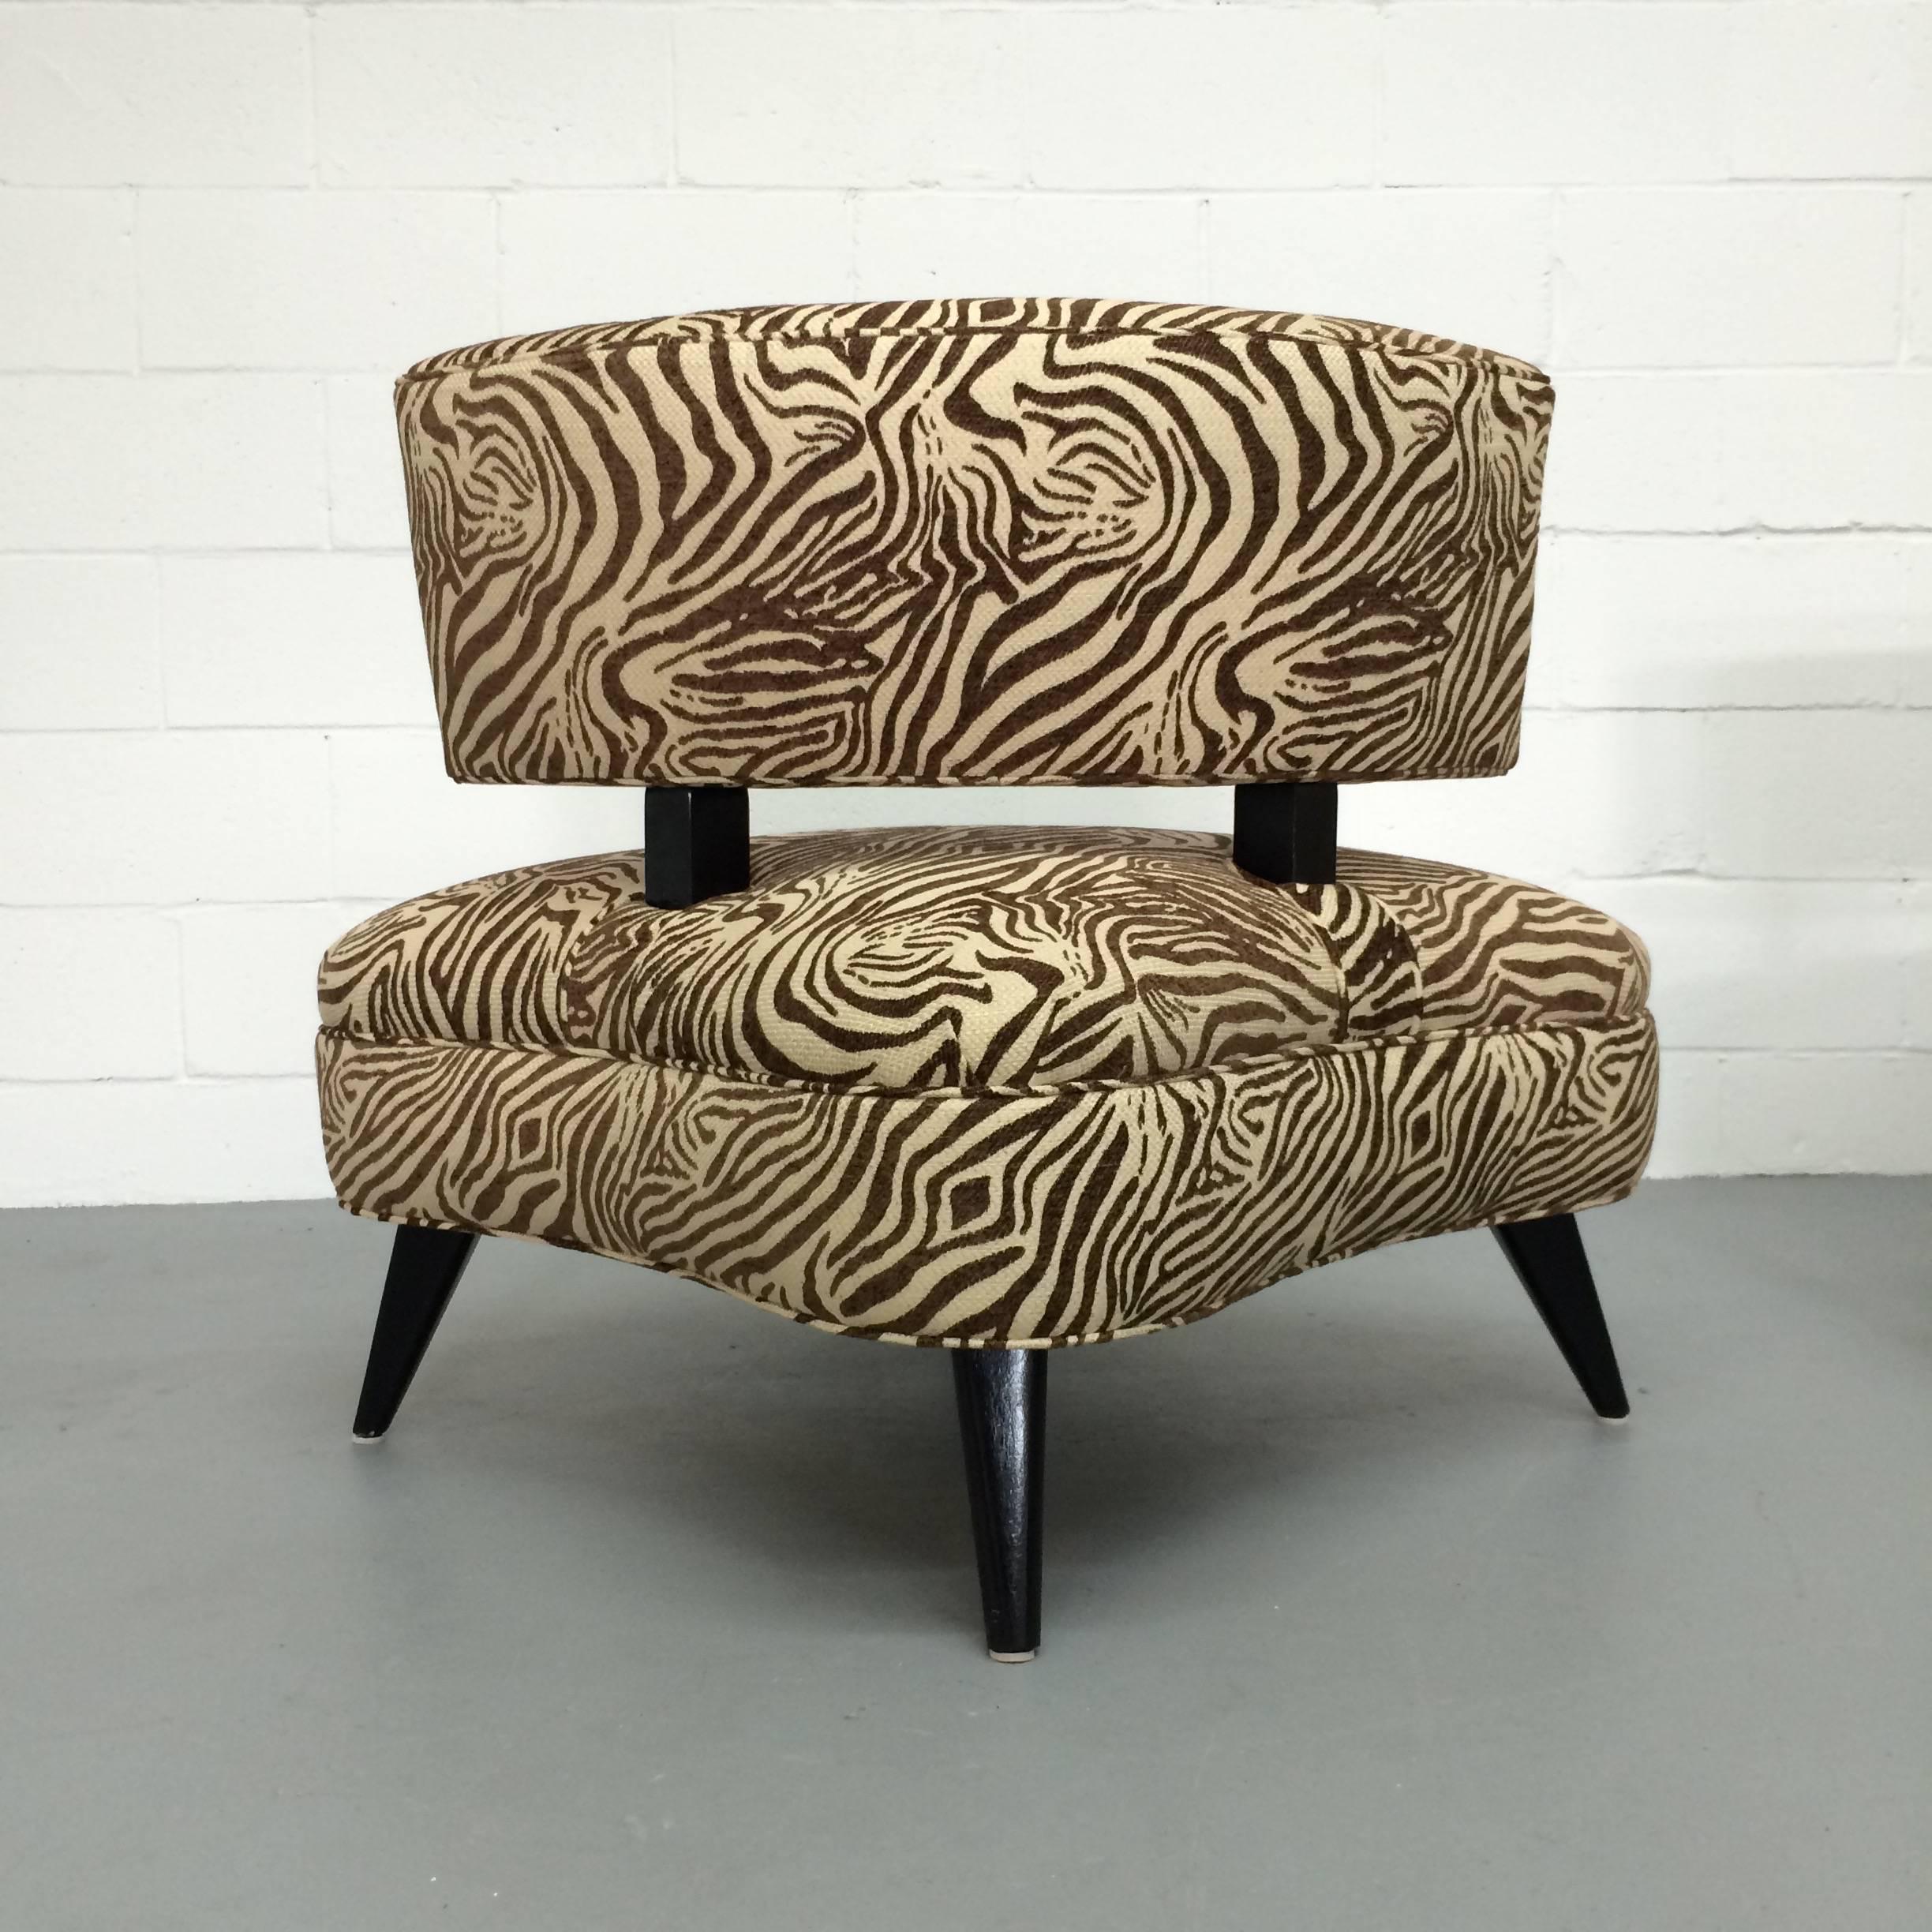 These fun funky 1950s vintage chairs have been reupholstered in a soft, durable zebra print in browns and creams. The print on each chair matches the other chair on the seat and on the back. The legs, which jut out at an angle, are black with a semi